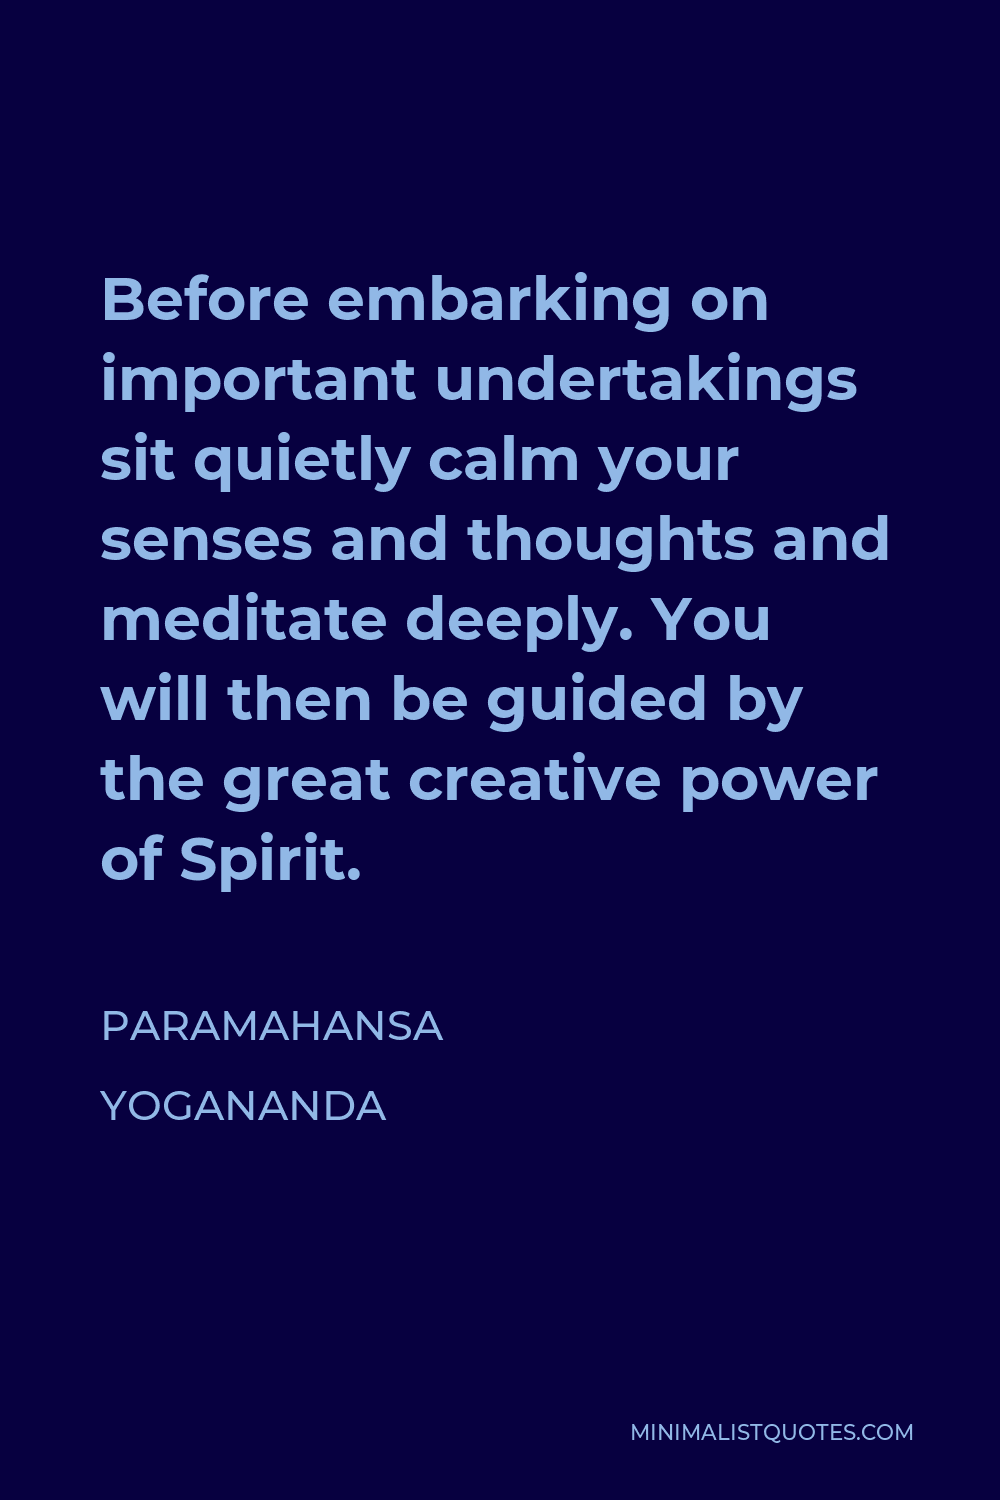 Paramahansa Yogananda Quote - Before embarking on important undertakings sit quietly calm your senses and thoughts and meditate deeply. You will then be guided by the great creative power of Spirit.